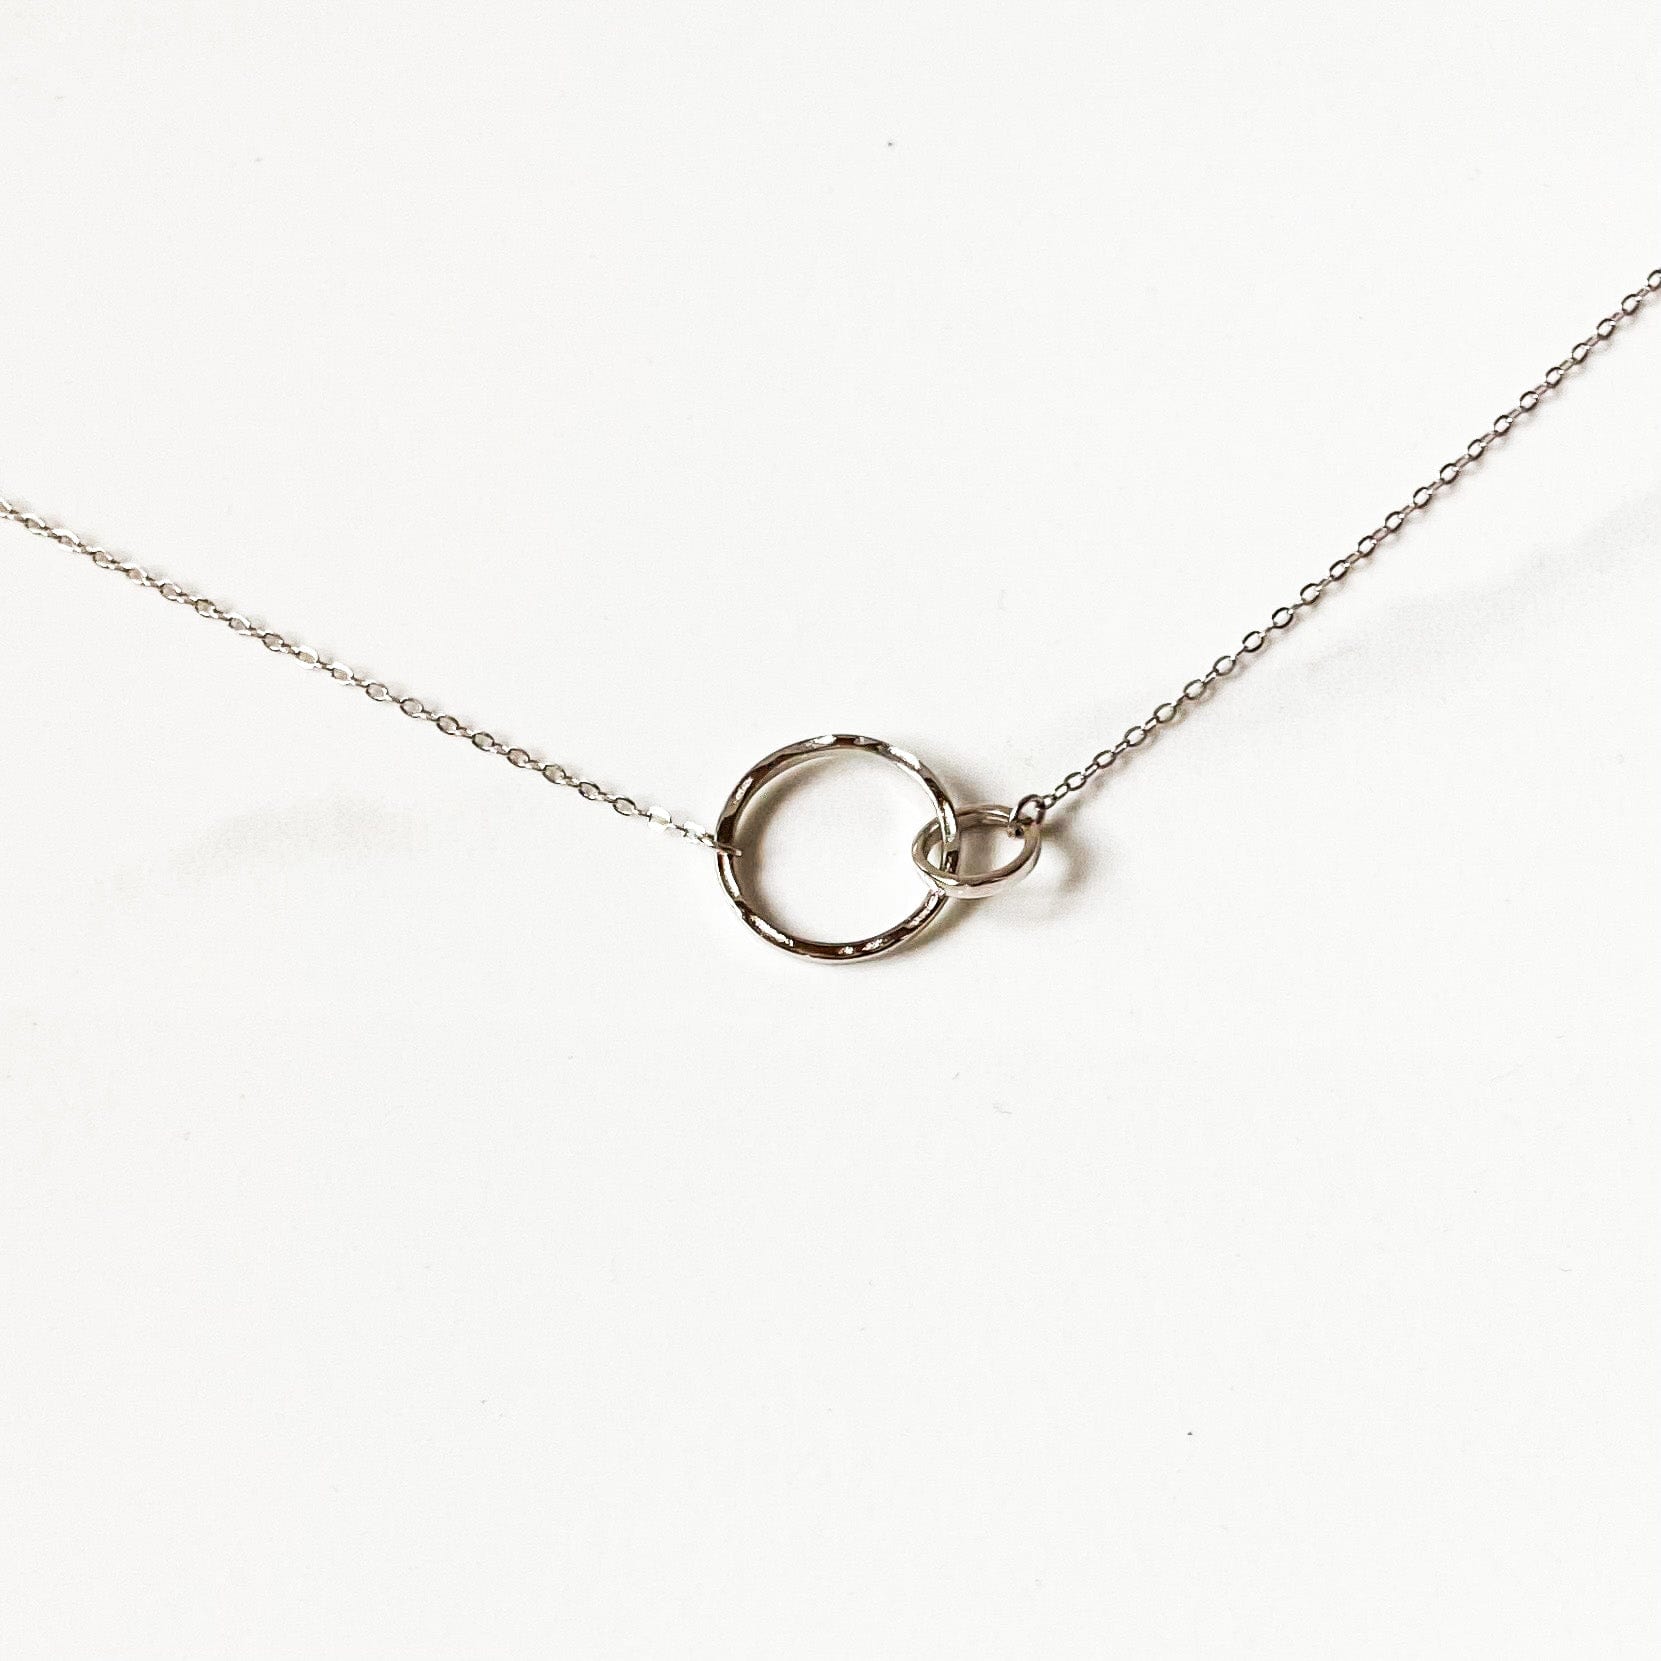 memorial necklace for loss of a loved one silver double circle necklace